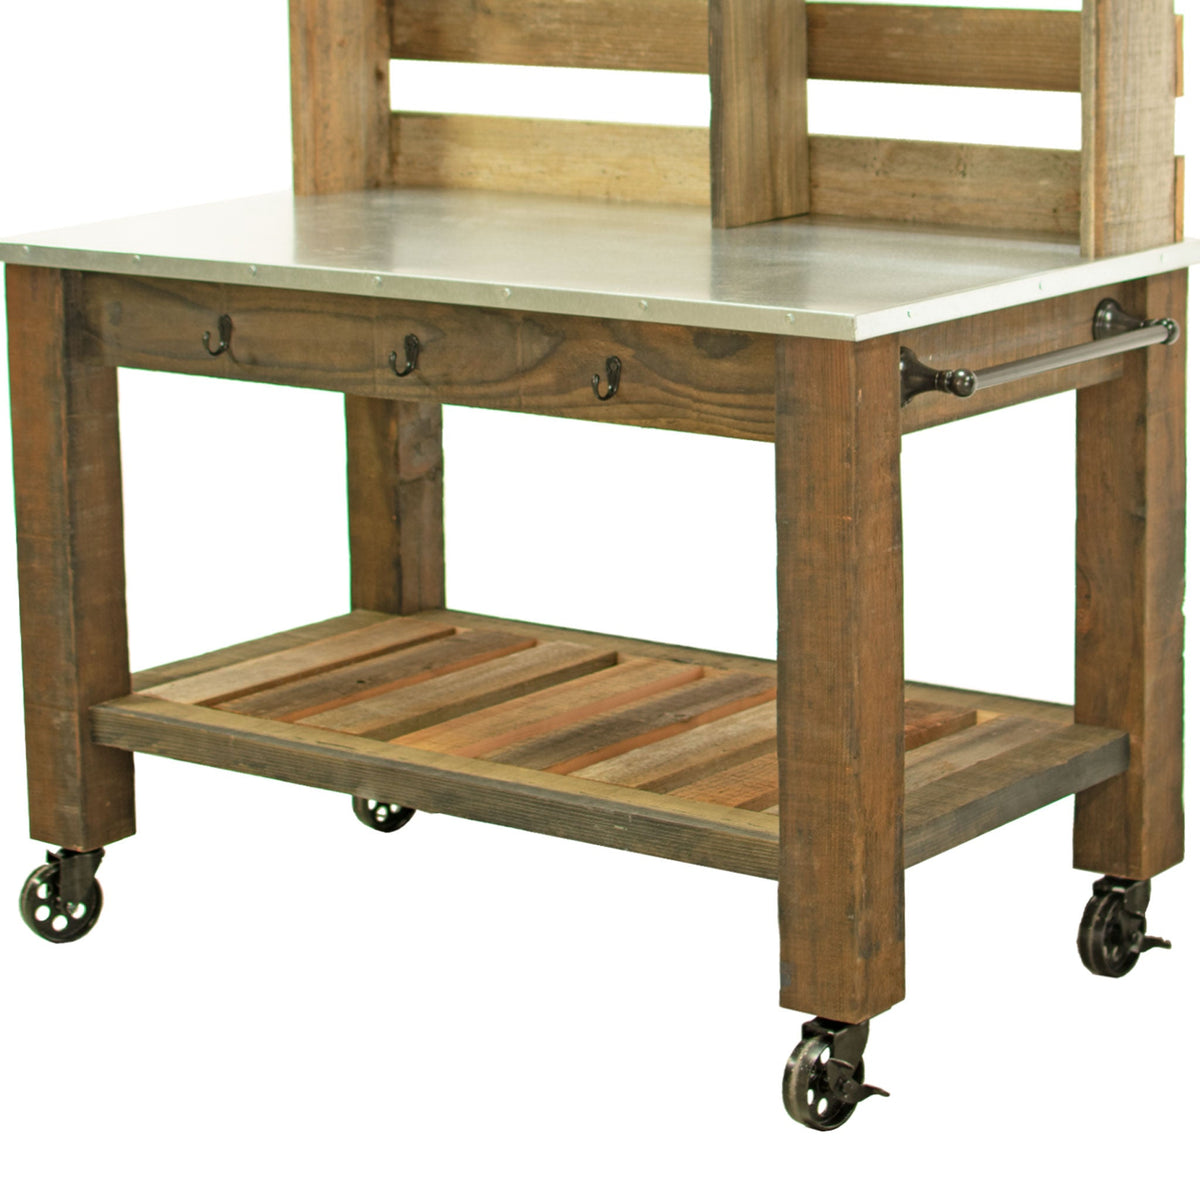 Purchase the casters we include on our Redwood Potting Tables and Outdoor Rolling Carts